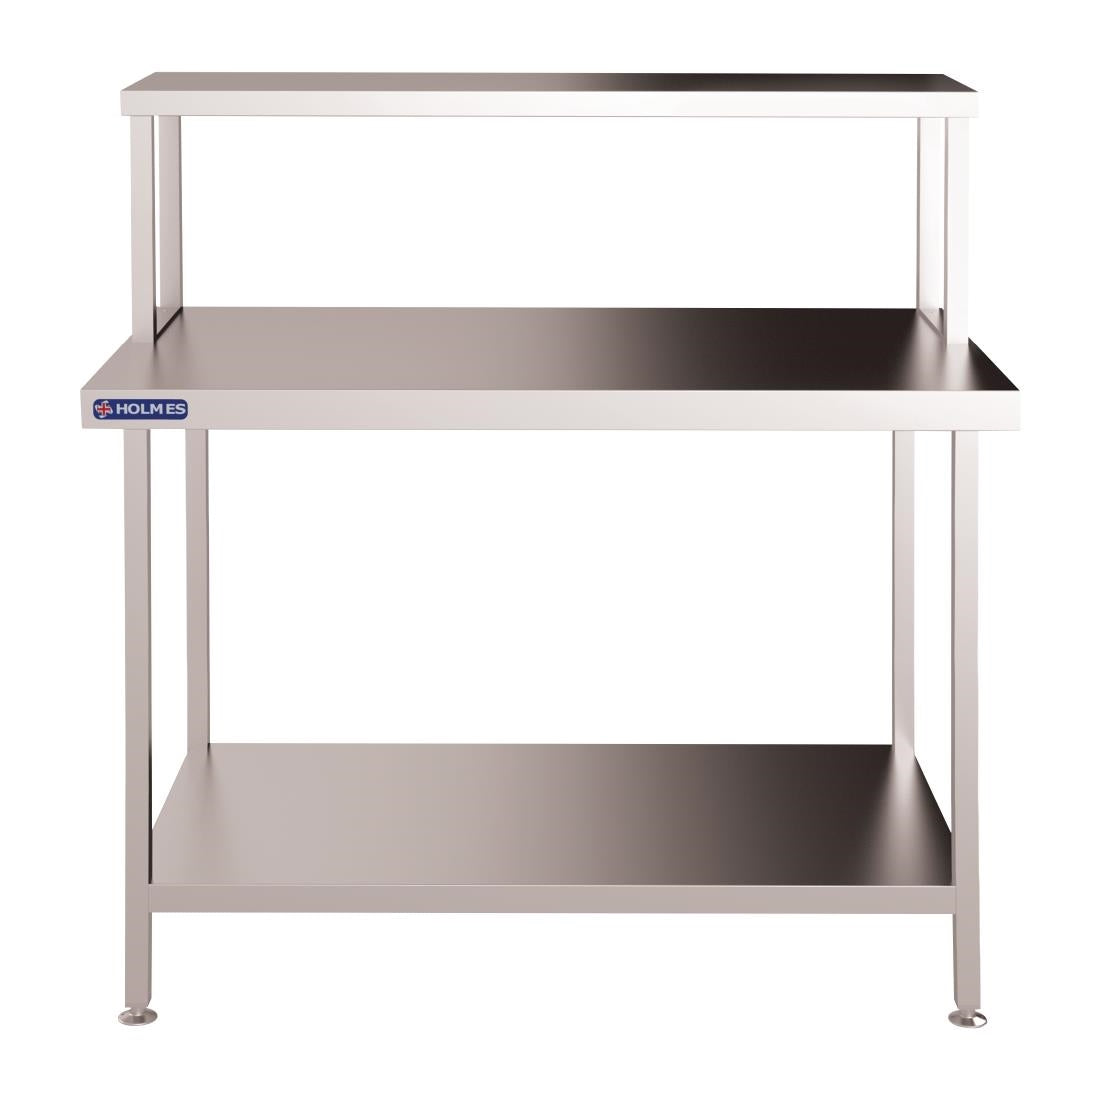 FC443 Holmes Stainless Steel Wall Table Welded with Gantry 1800mm JD Catering Equipment Solutions Ltd